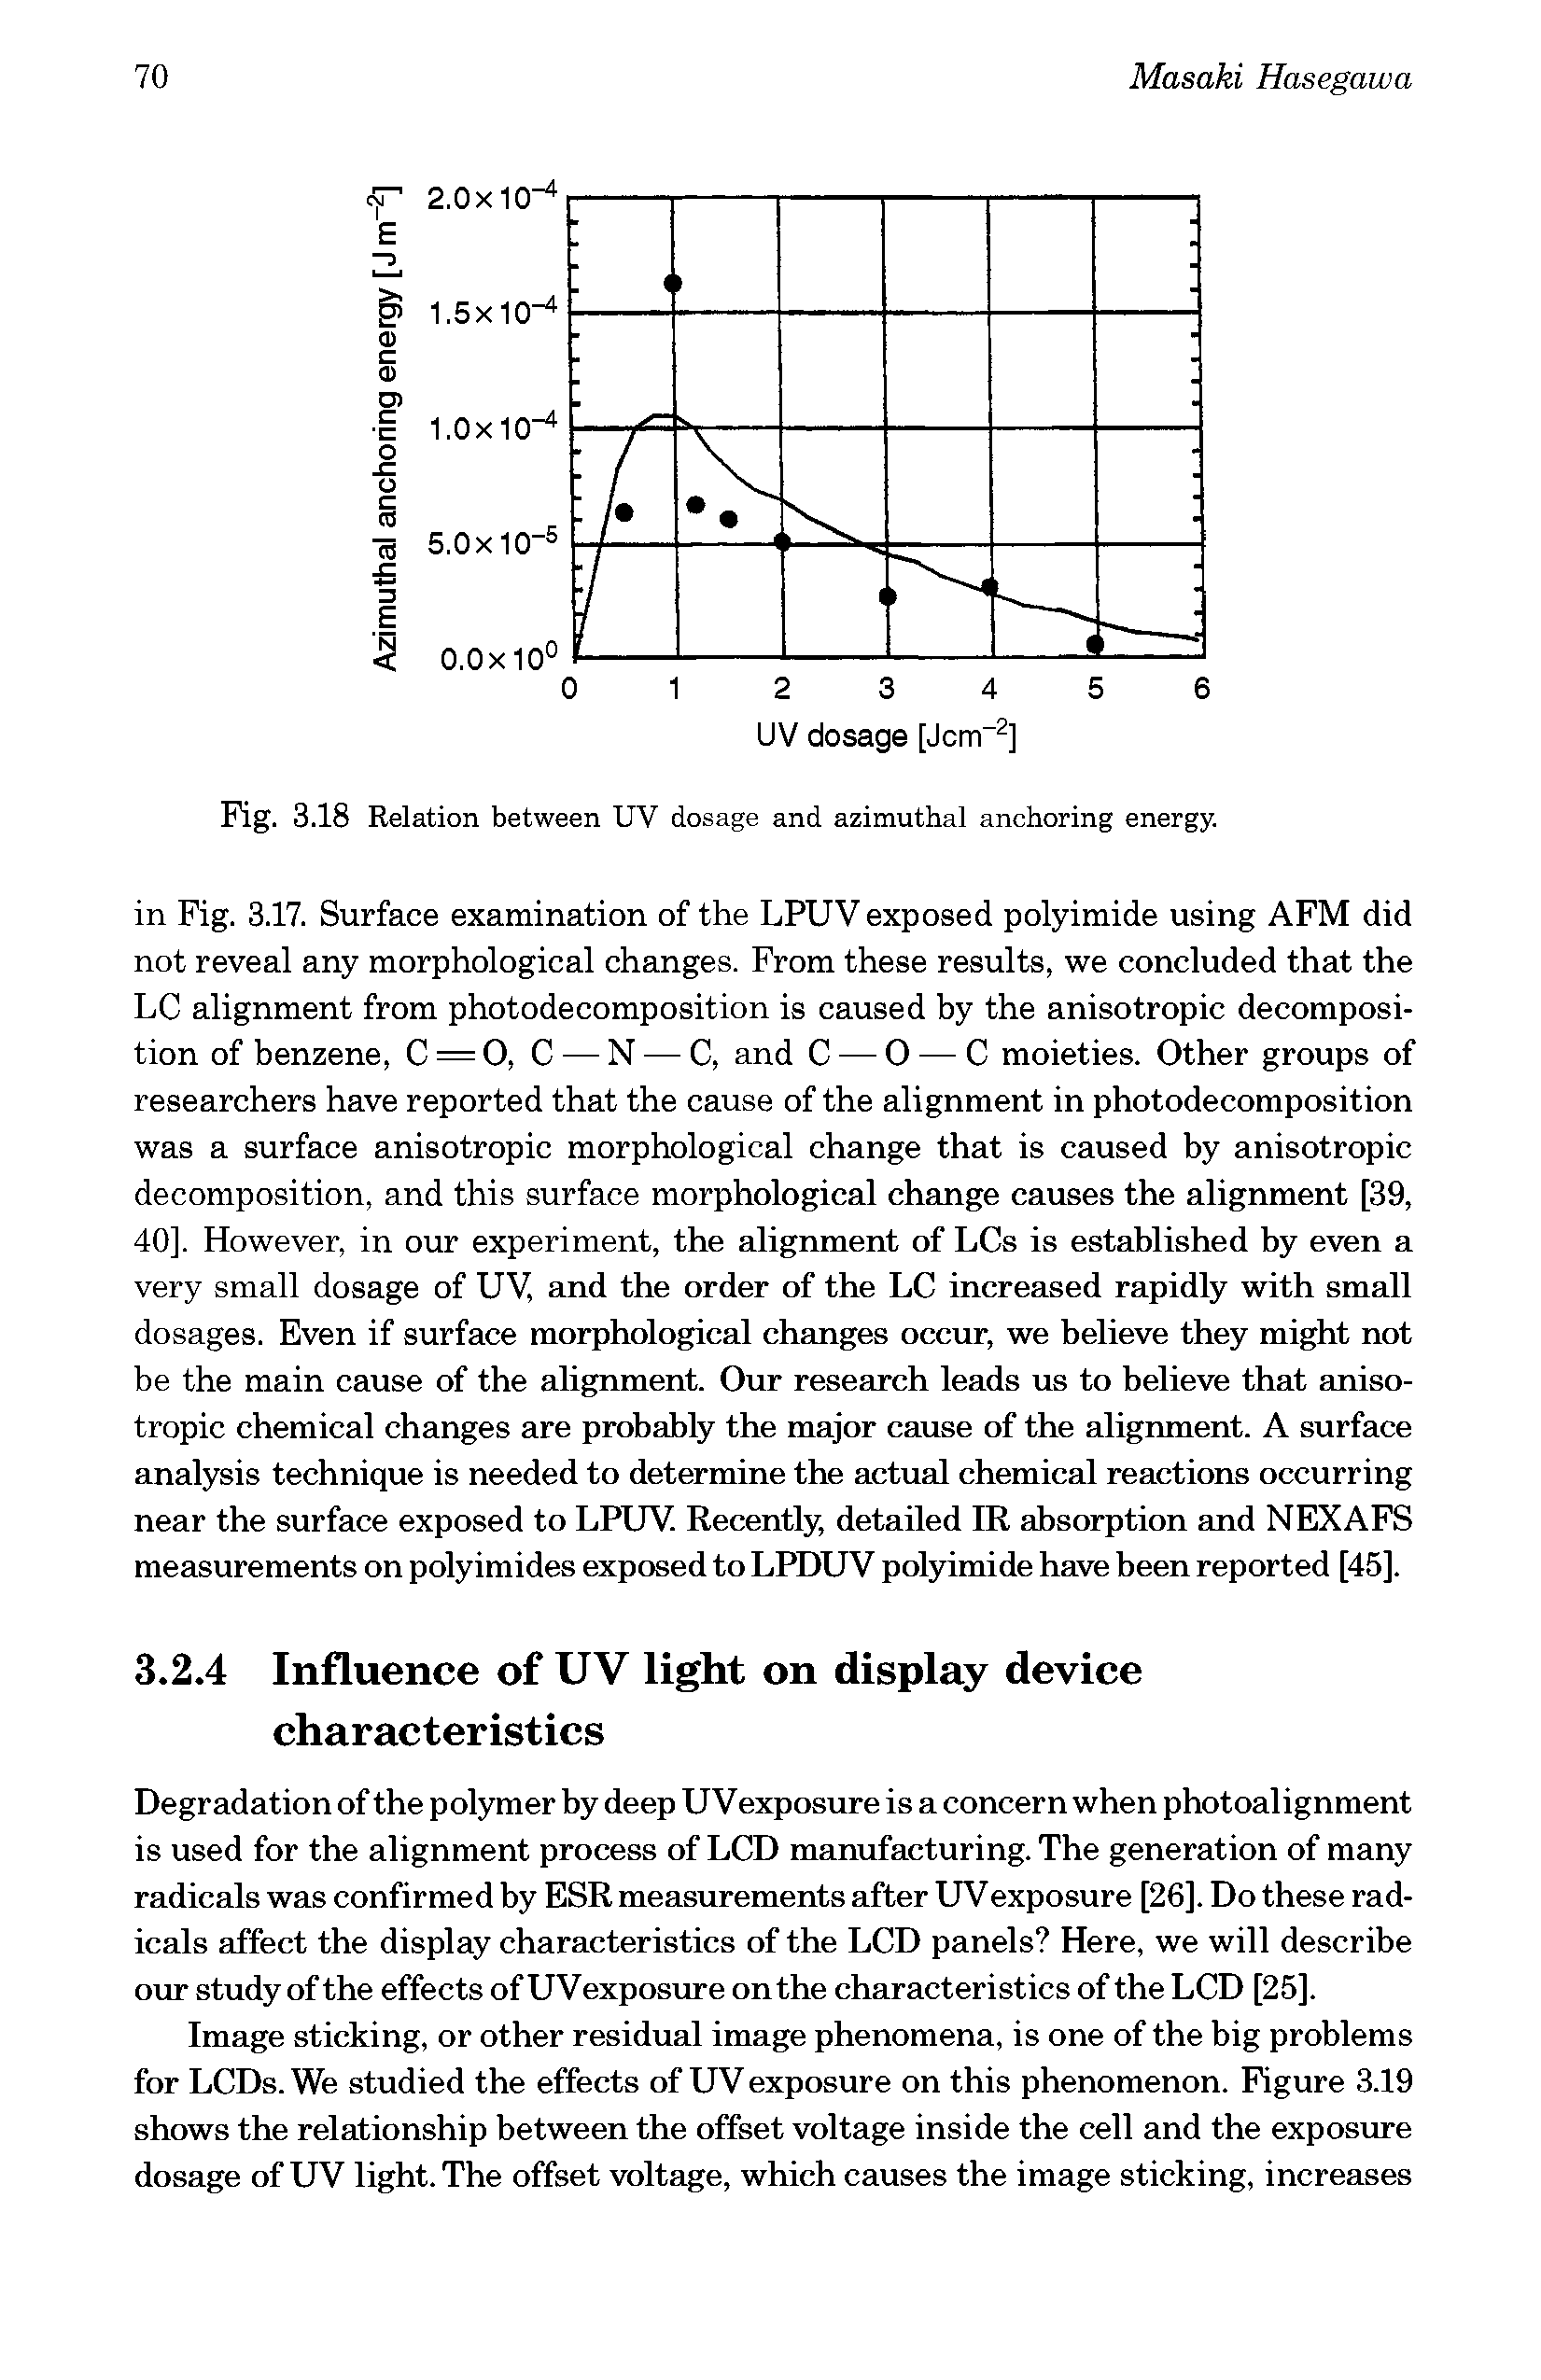 Fig. 3.18 Relation between UV dosage and azimuthal anchoring energy.